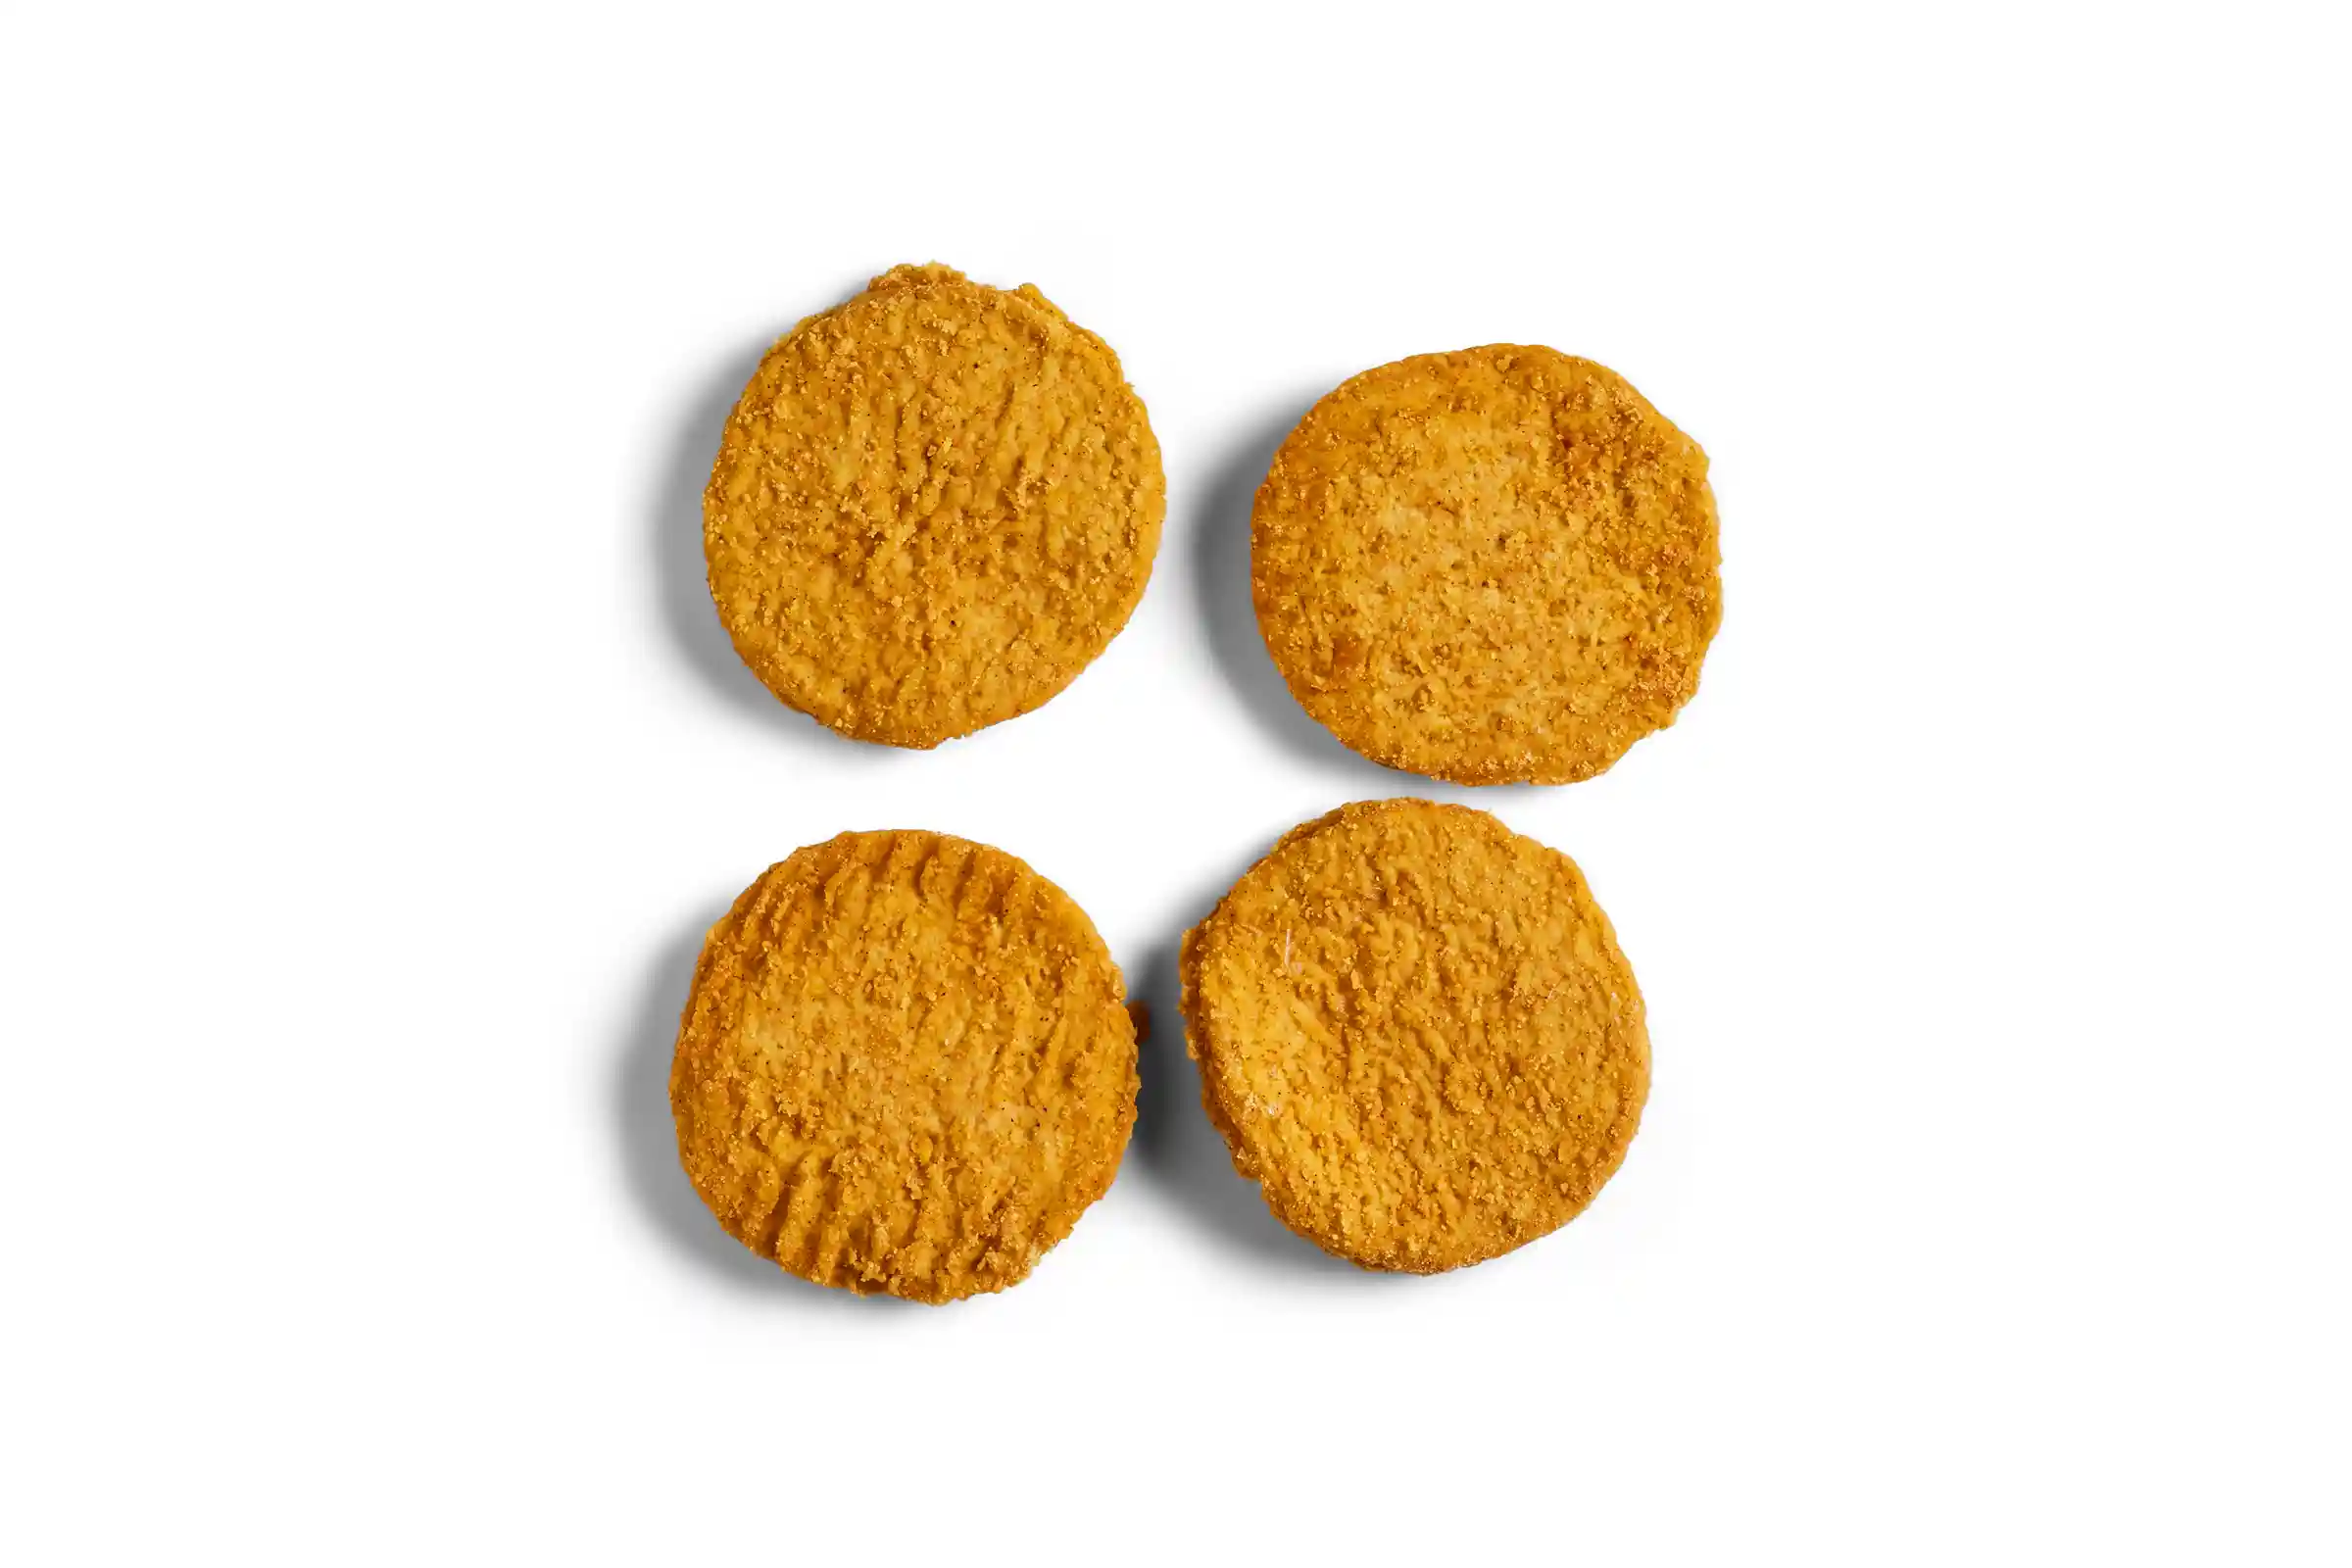 Tyson® Fully Cooked Whole Grain Breaded Chicken Patties, CN, 3.29 oz. _image_11